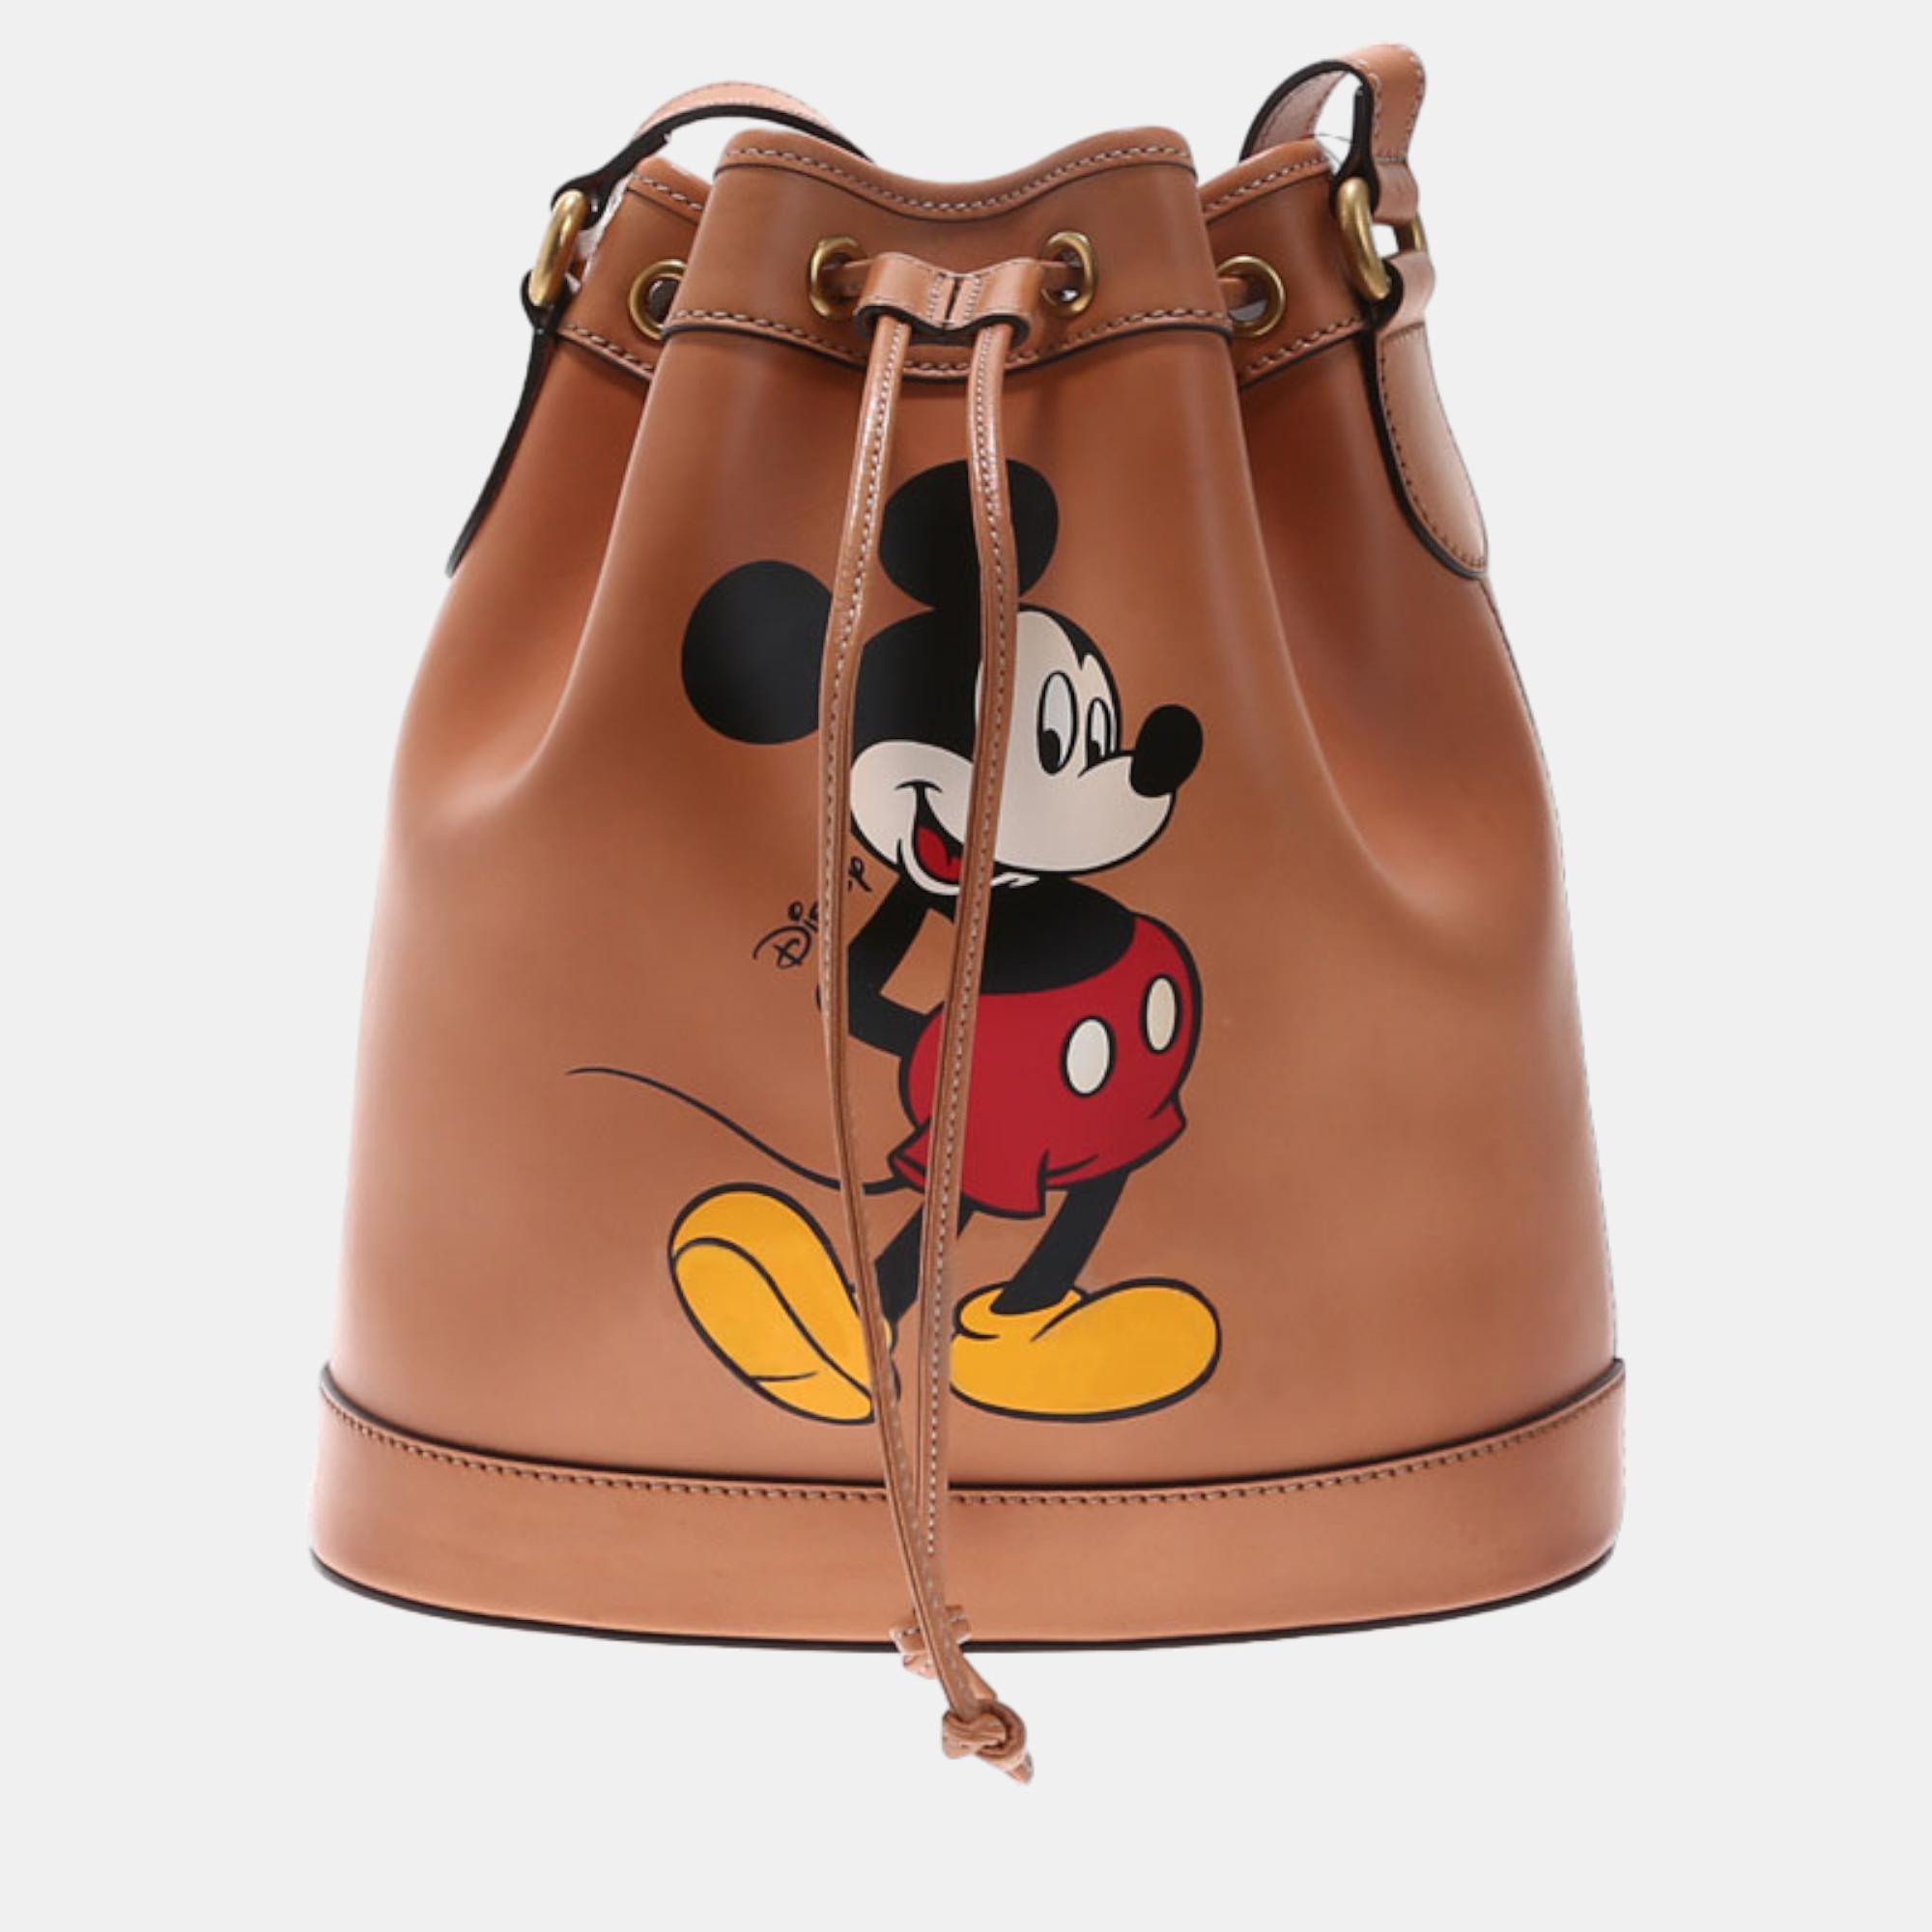 Gucci X Disney Mickey Mouse Printed Leather Bucket Bag